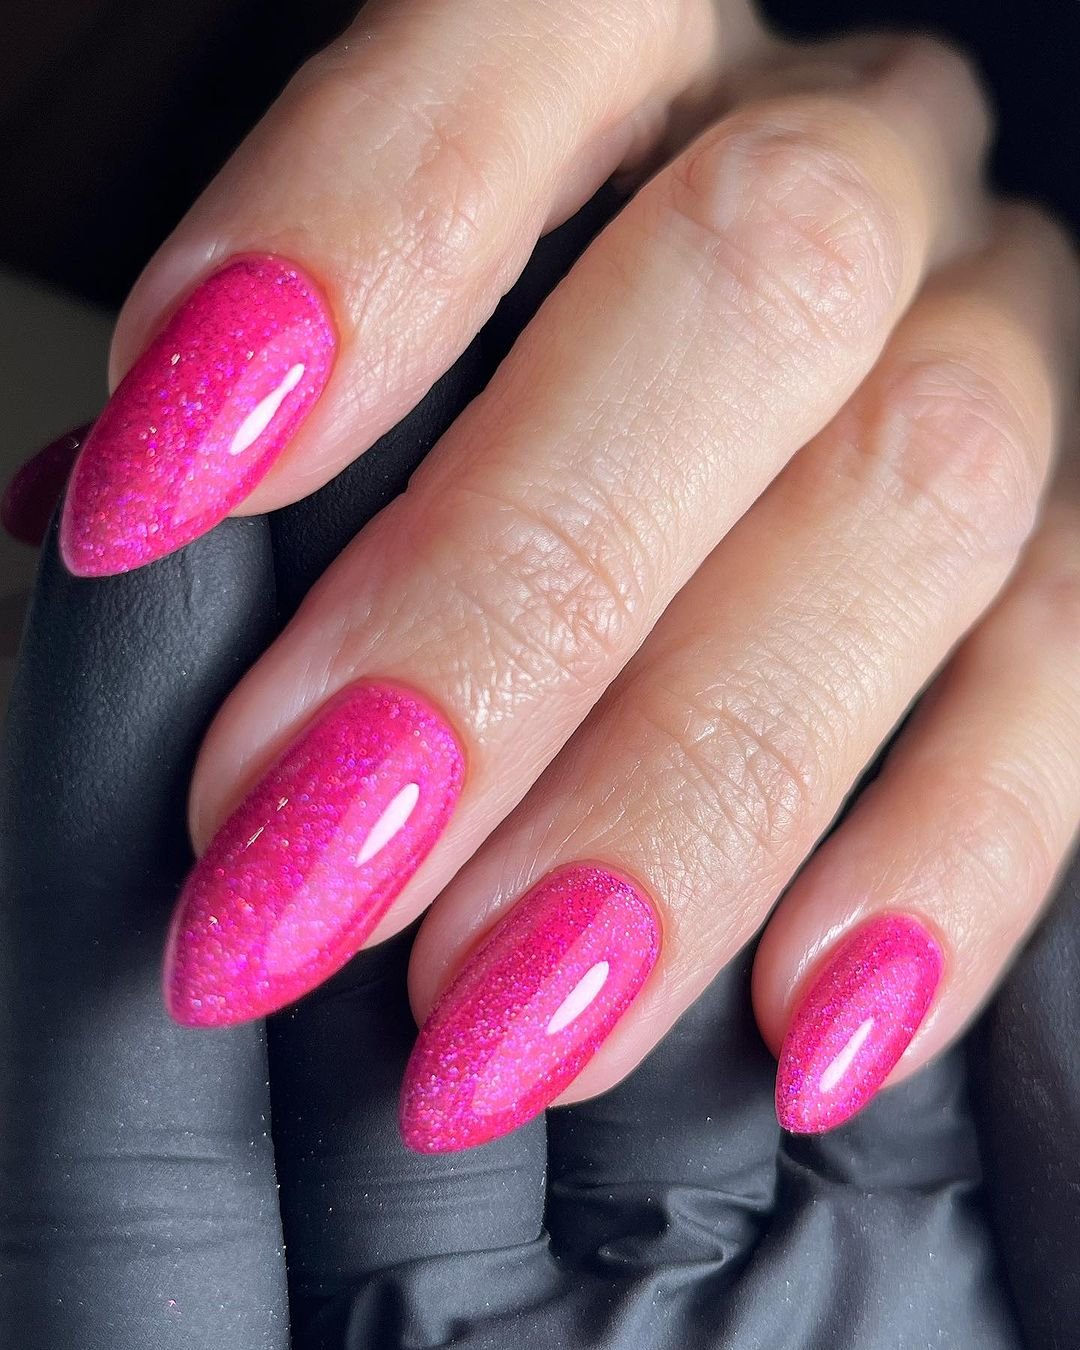 31 - Picture of Pink Glitter Nails